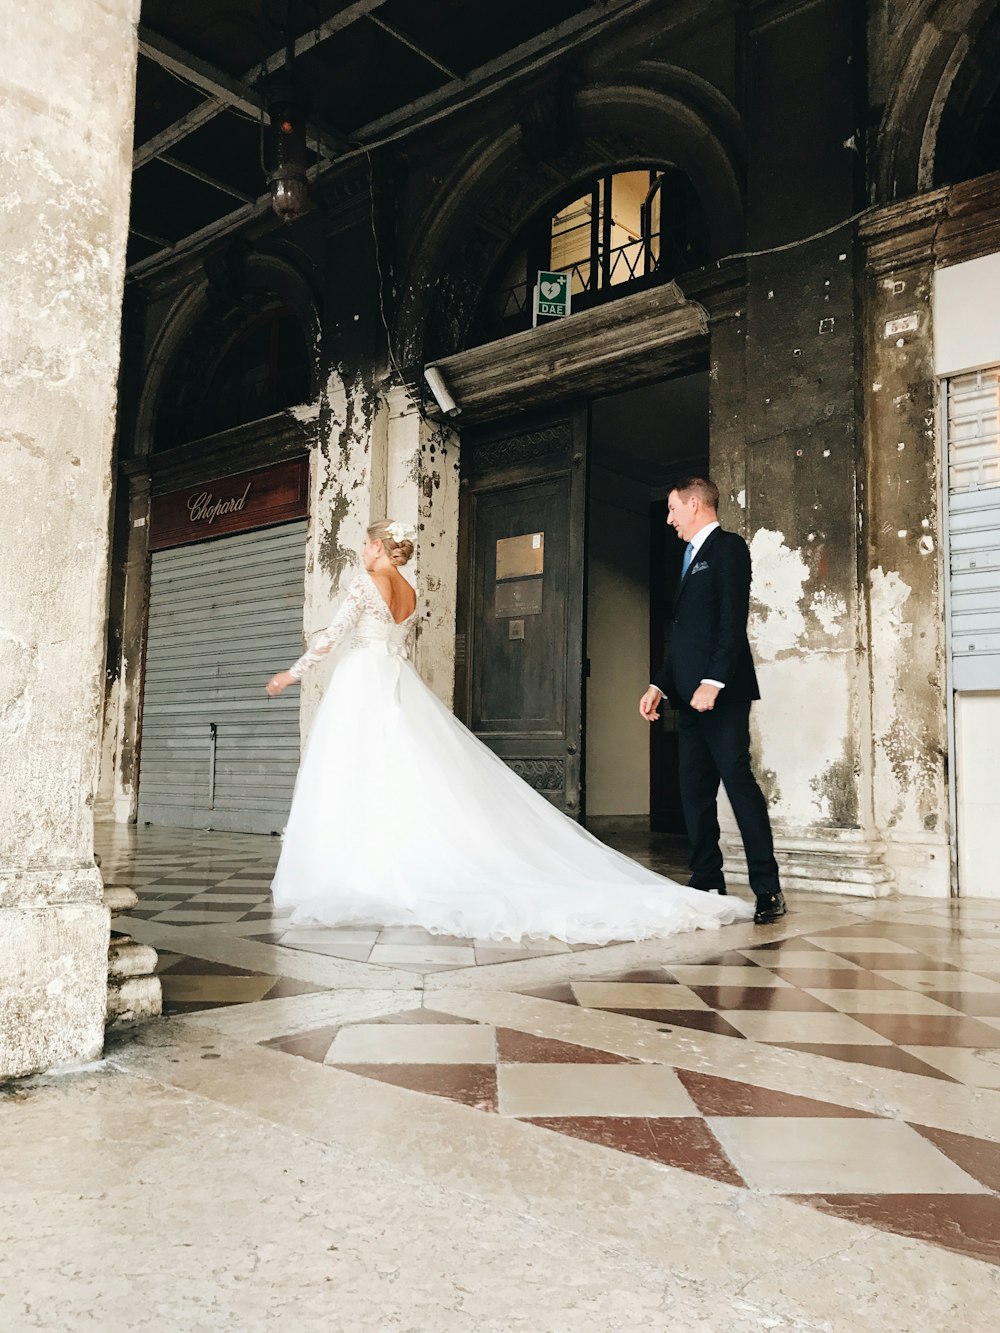 man in black suit and woman in white wedding dress walking on hallway